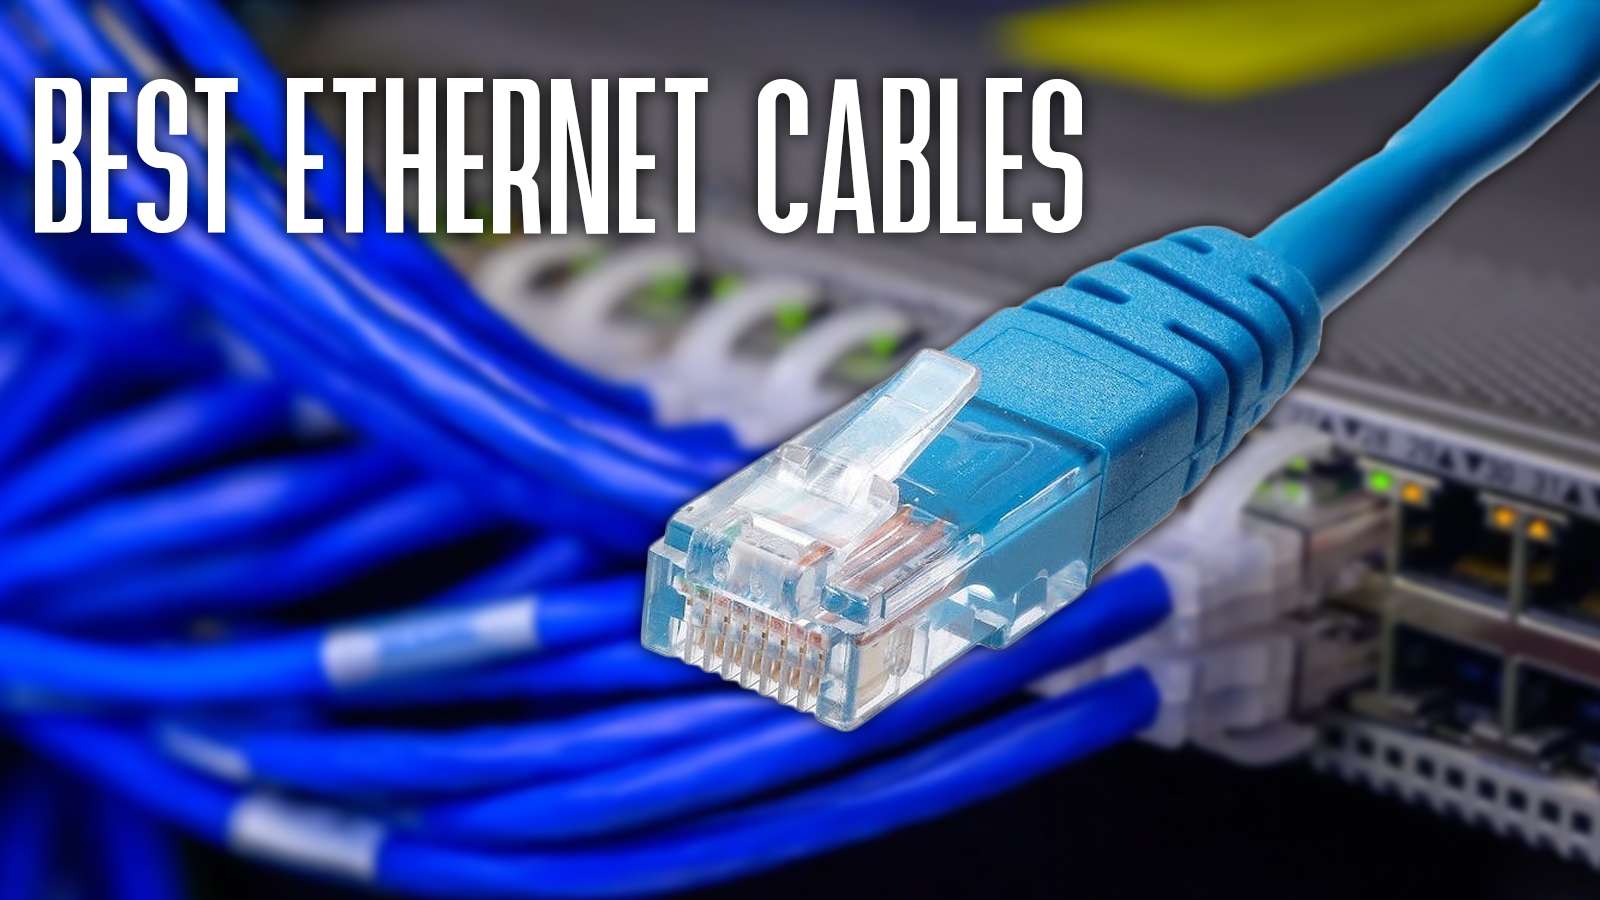 Ethernet cable over a server